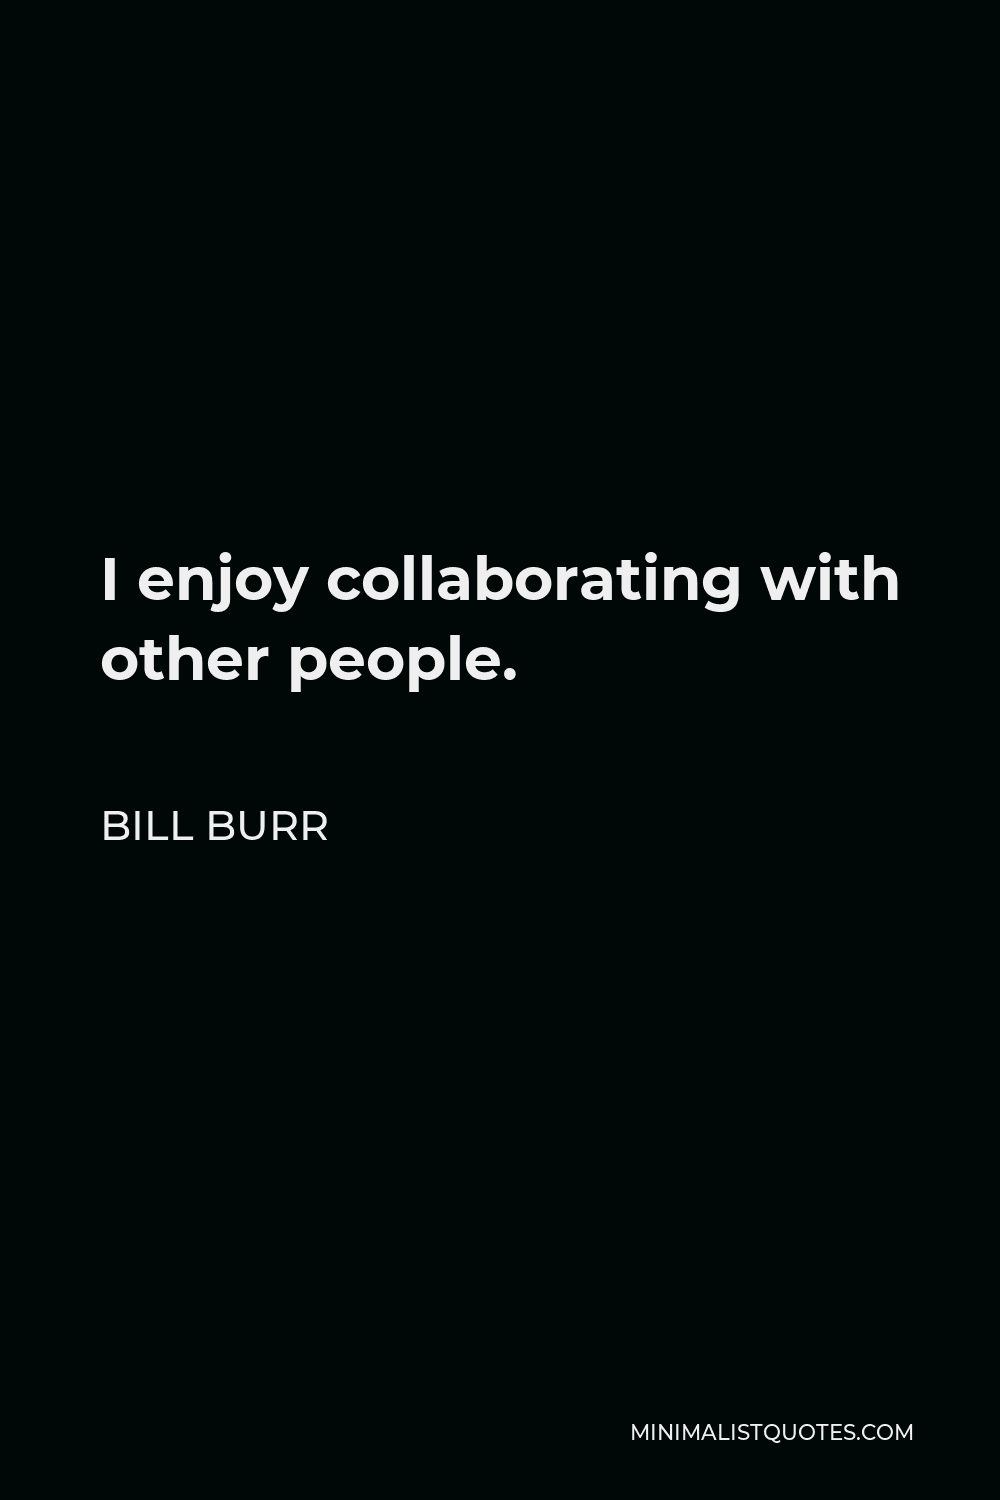 Bill Burr Quote - I enjoy collaborating with other people.